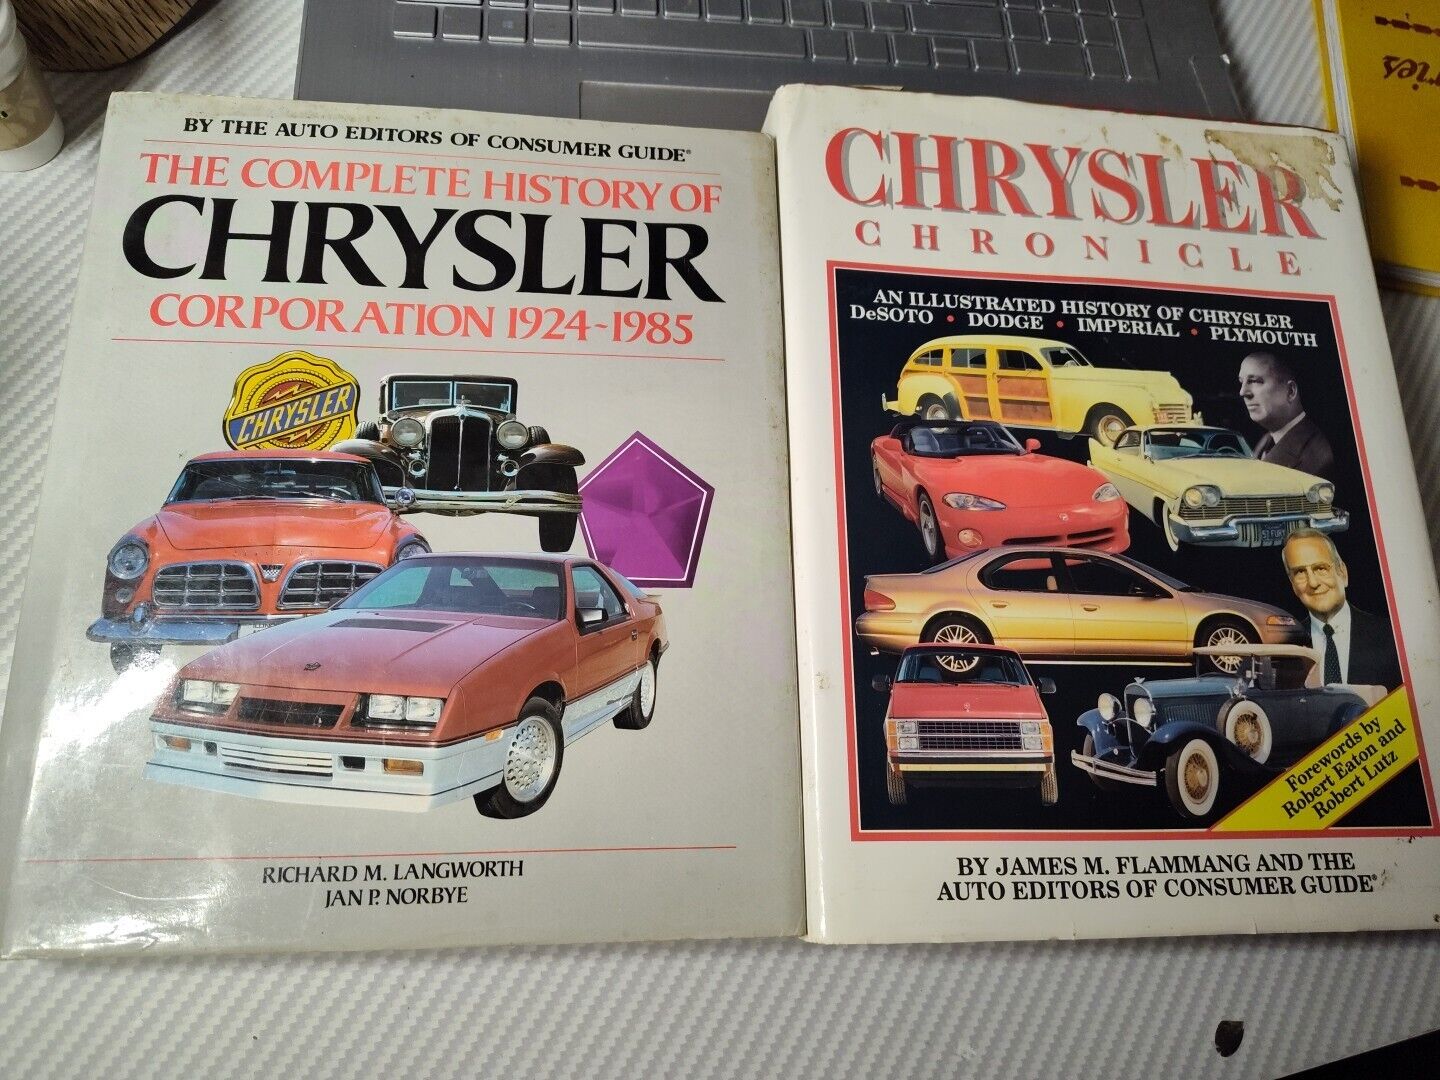 THE COMPLETE HISTORY OF CHRYSLER CORPORATION ~ 1924 to 1985 ~ CHRYSLER CHRONICLE